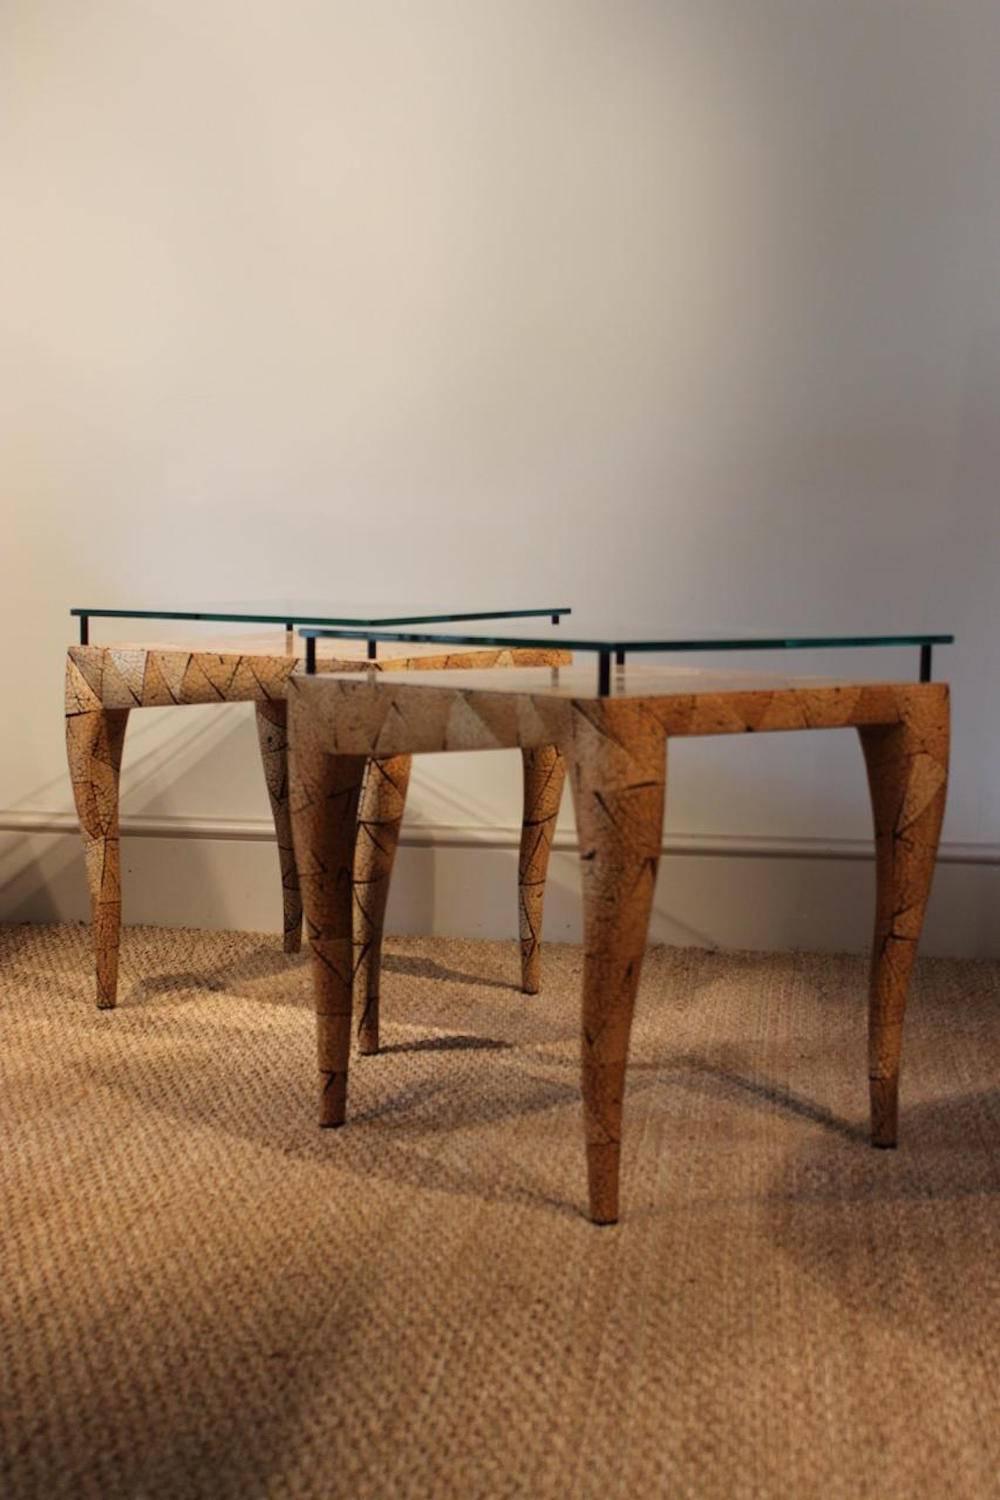 An unusual and highly decorative pair of late 20th century coconut-veneered occasional tables with raised glass tops by R & Y Augousti, London (applied maker's label).